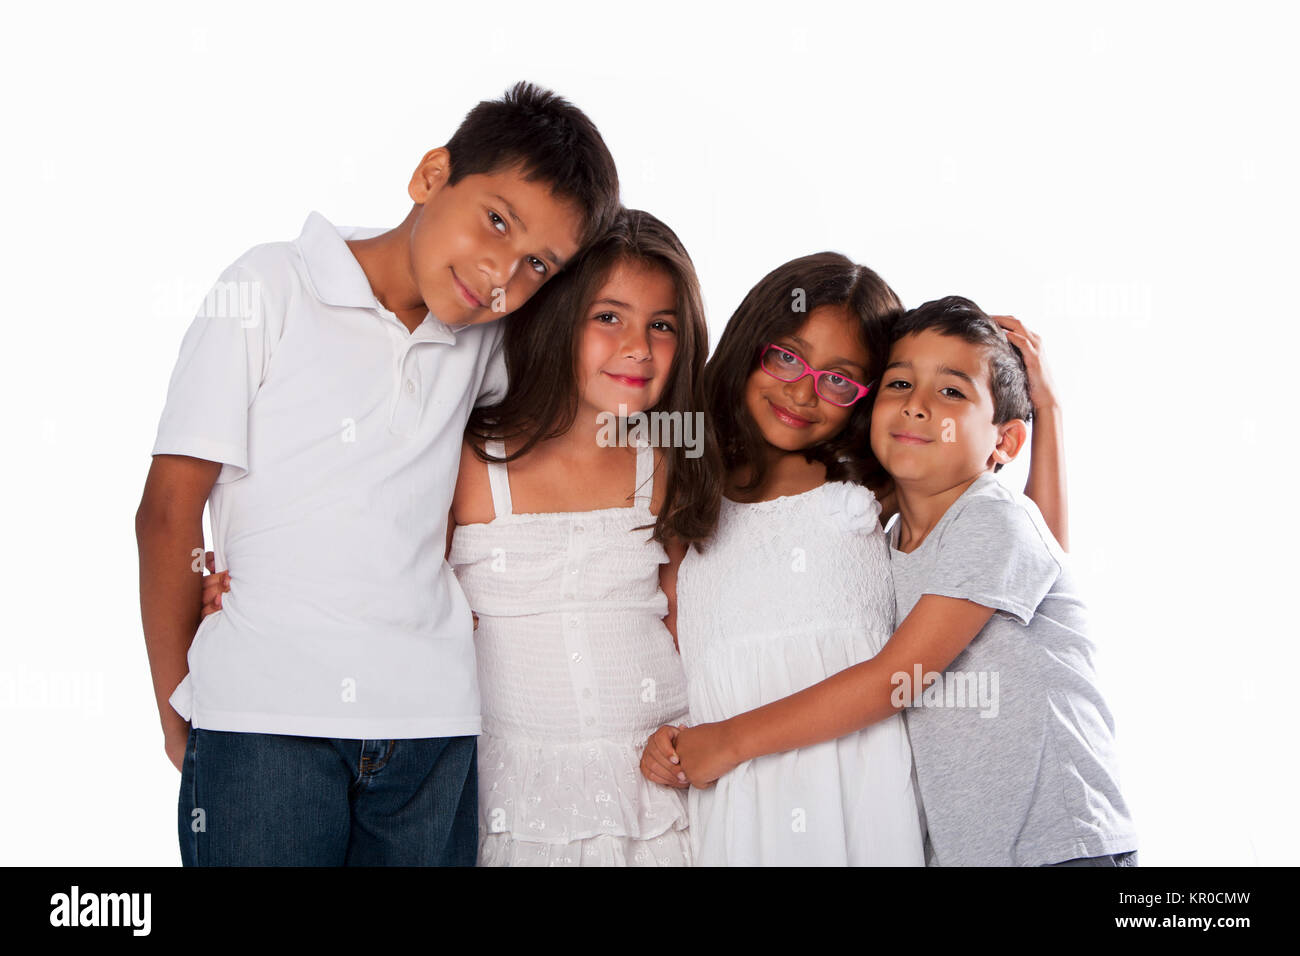 Brothers and sisters family Stock Photo